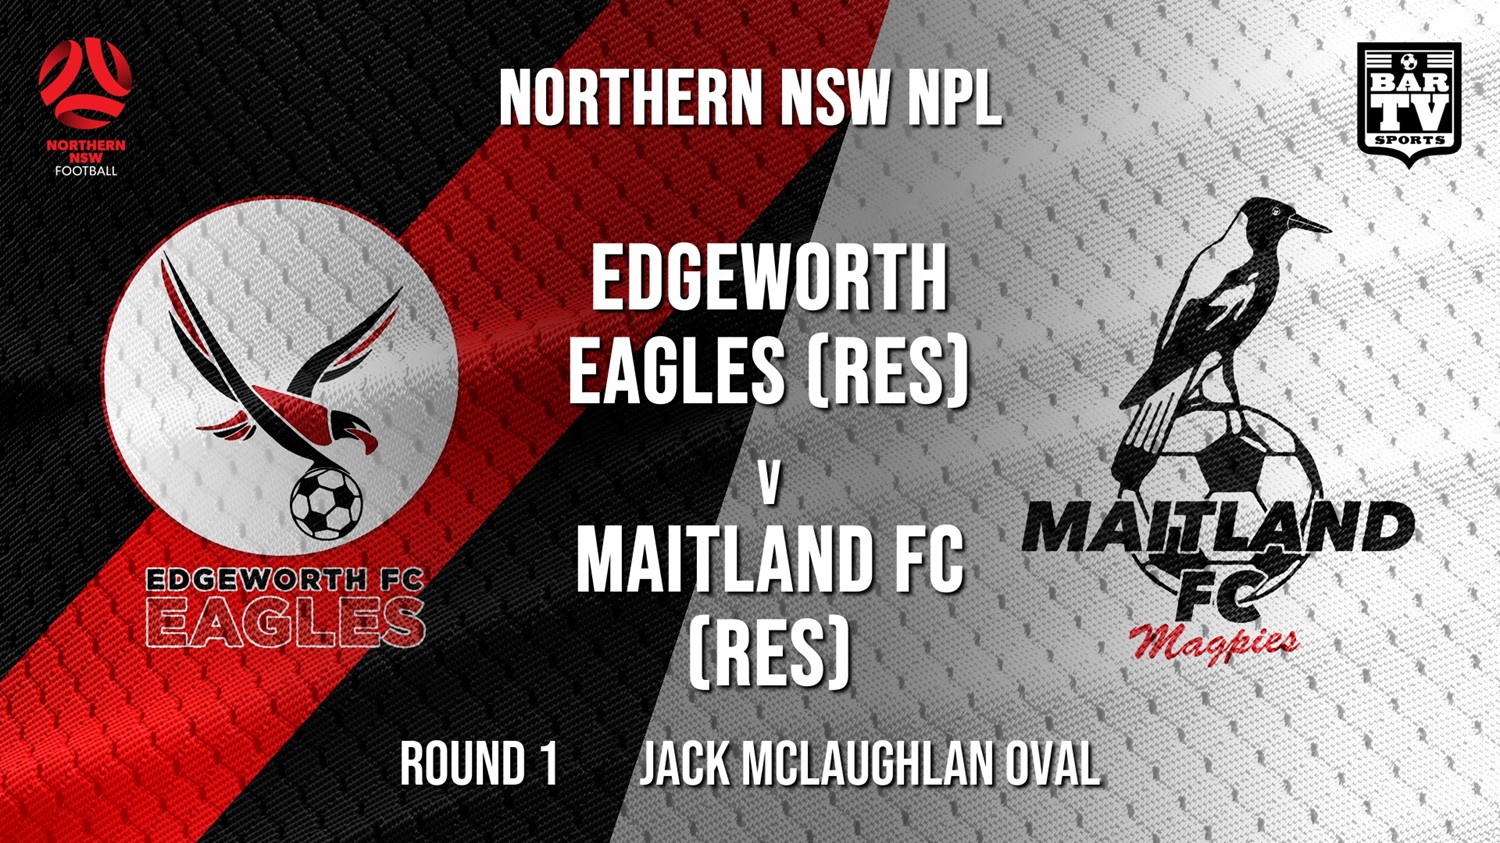 NPL - Northern NSW Reserves Round 1 - Edgeworth Eagles (Res) v Maitland FC (Res) Minigame Slate Image